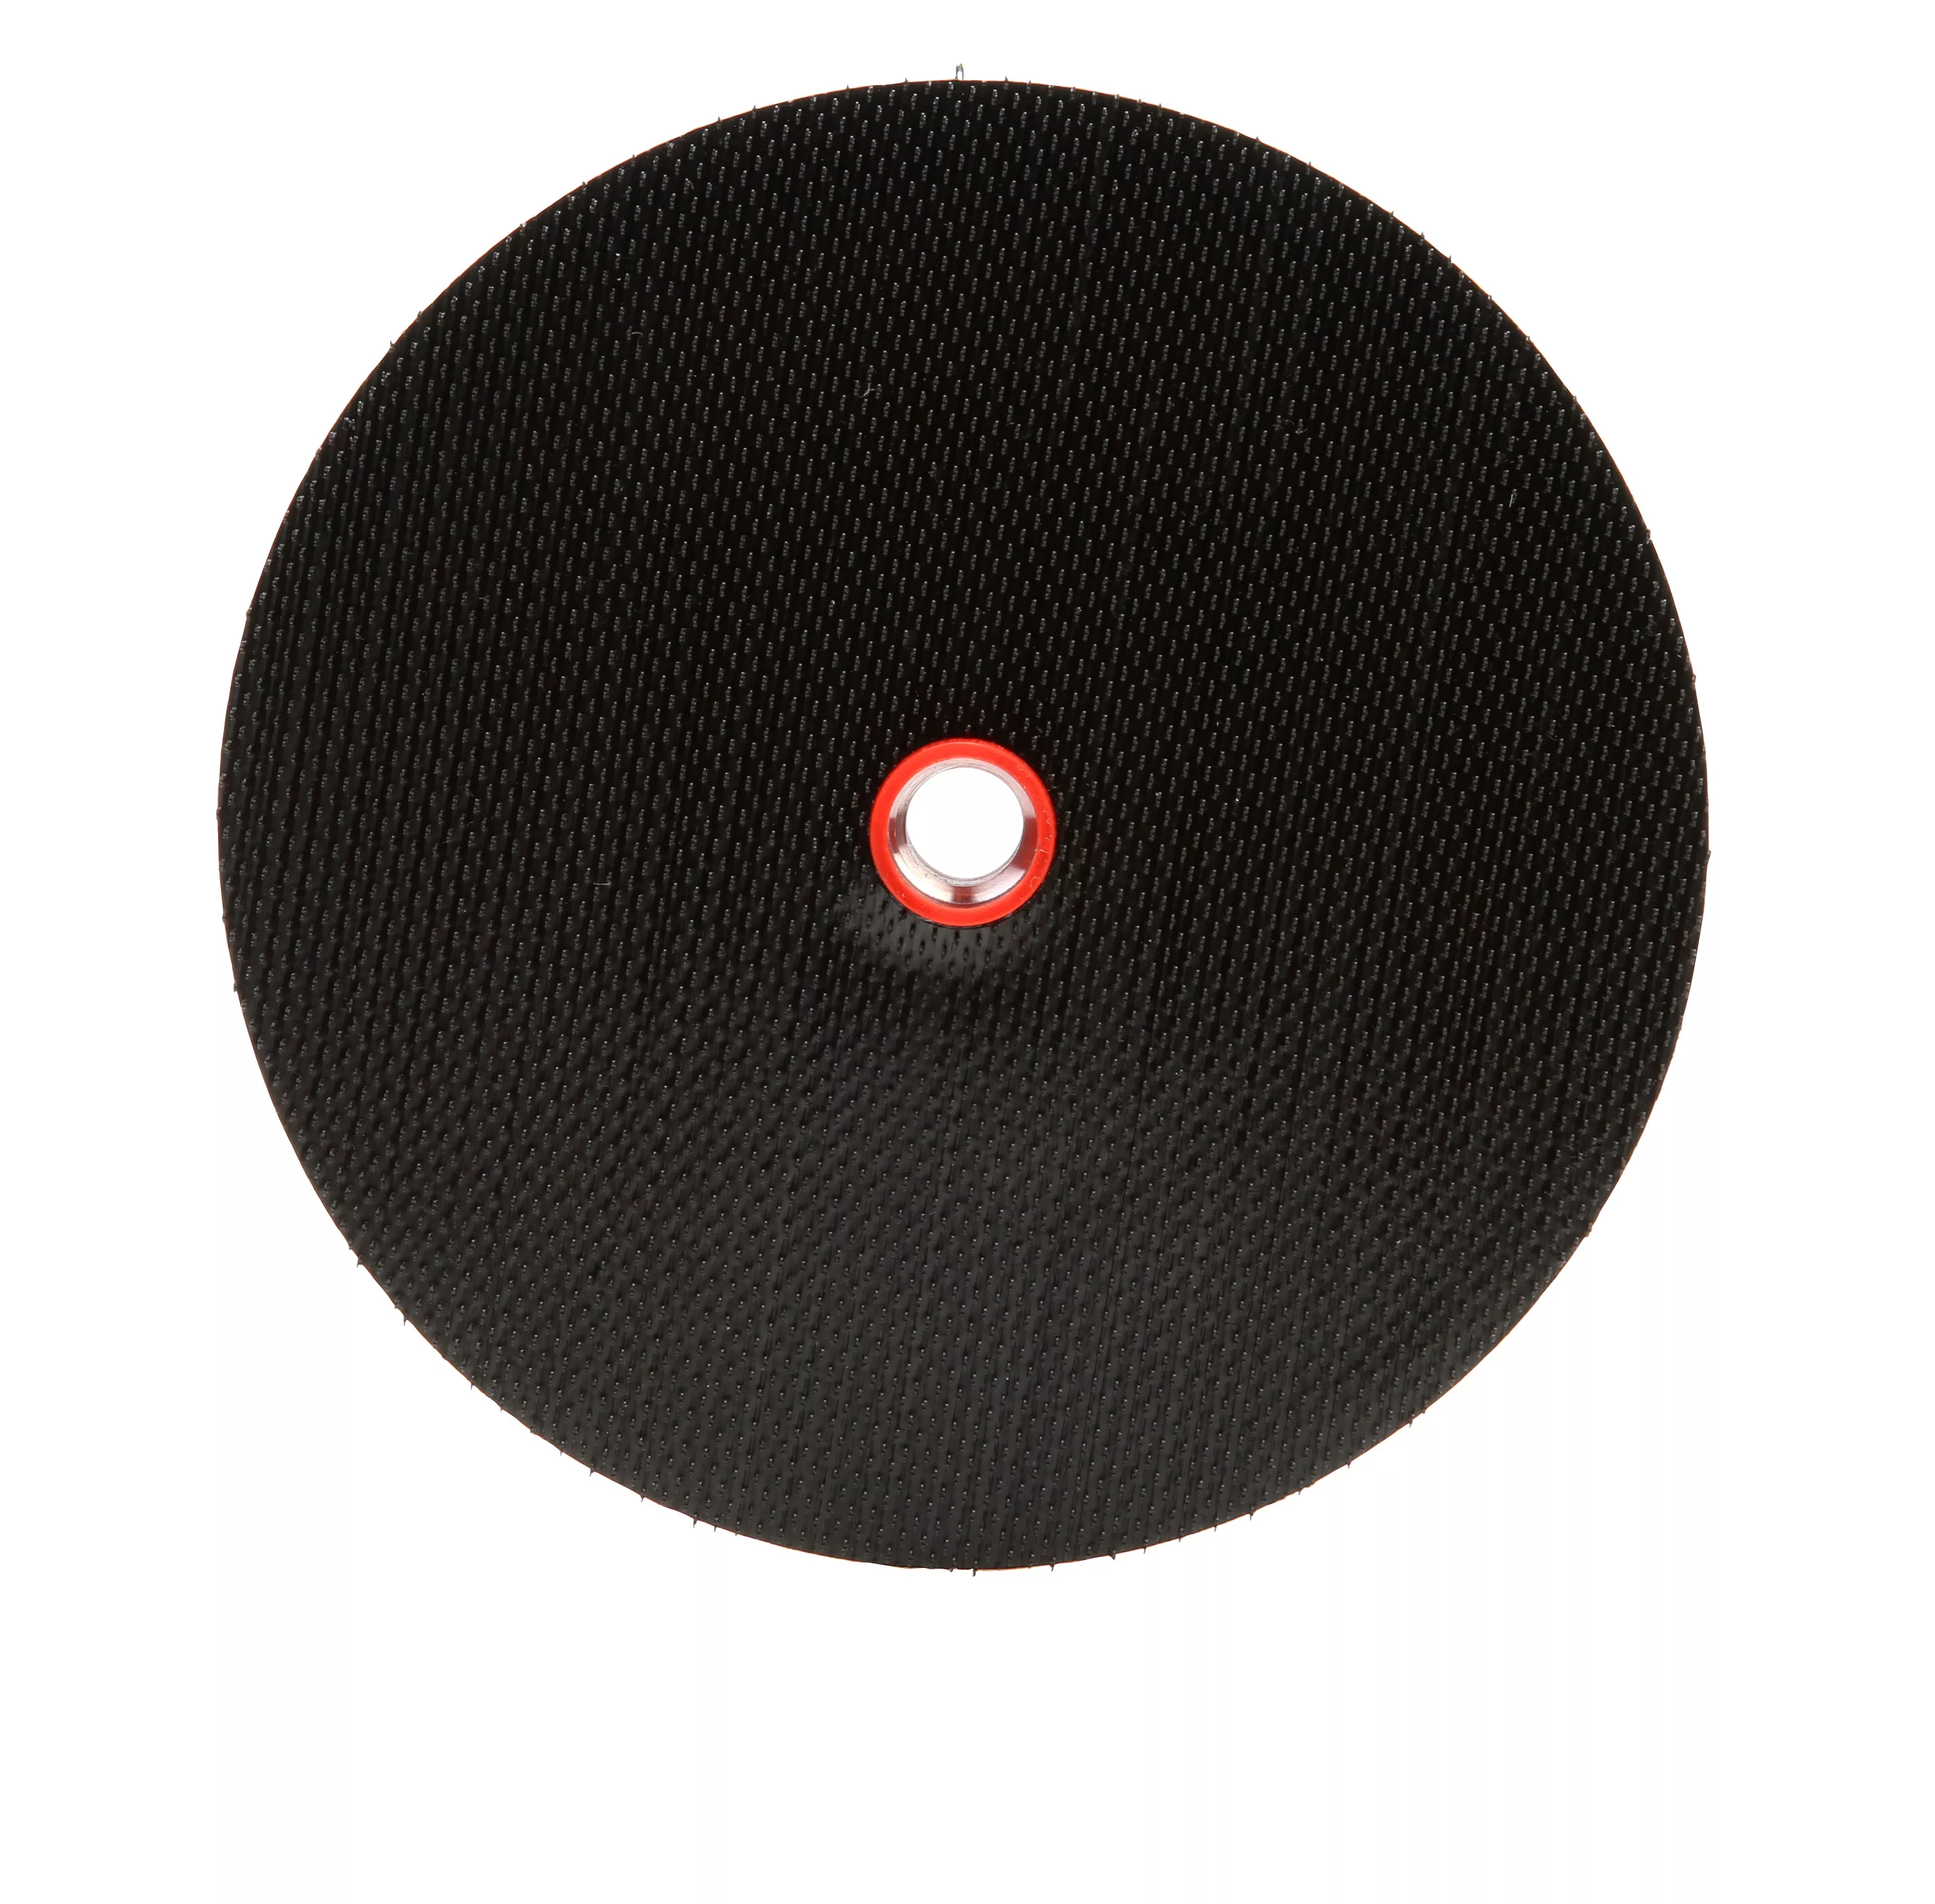 3M™ Hook and Loop Disc Pad Holder 20245, 7 in x 7/8 in Center Post
5/8